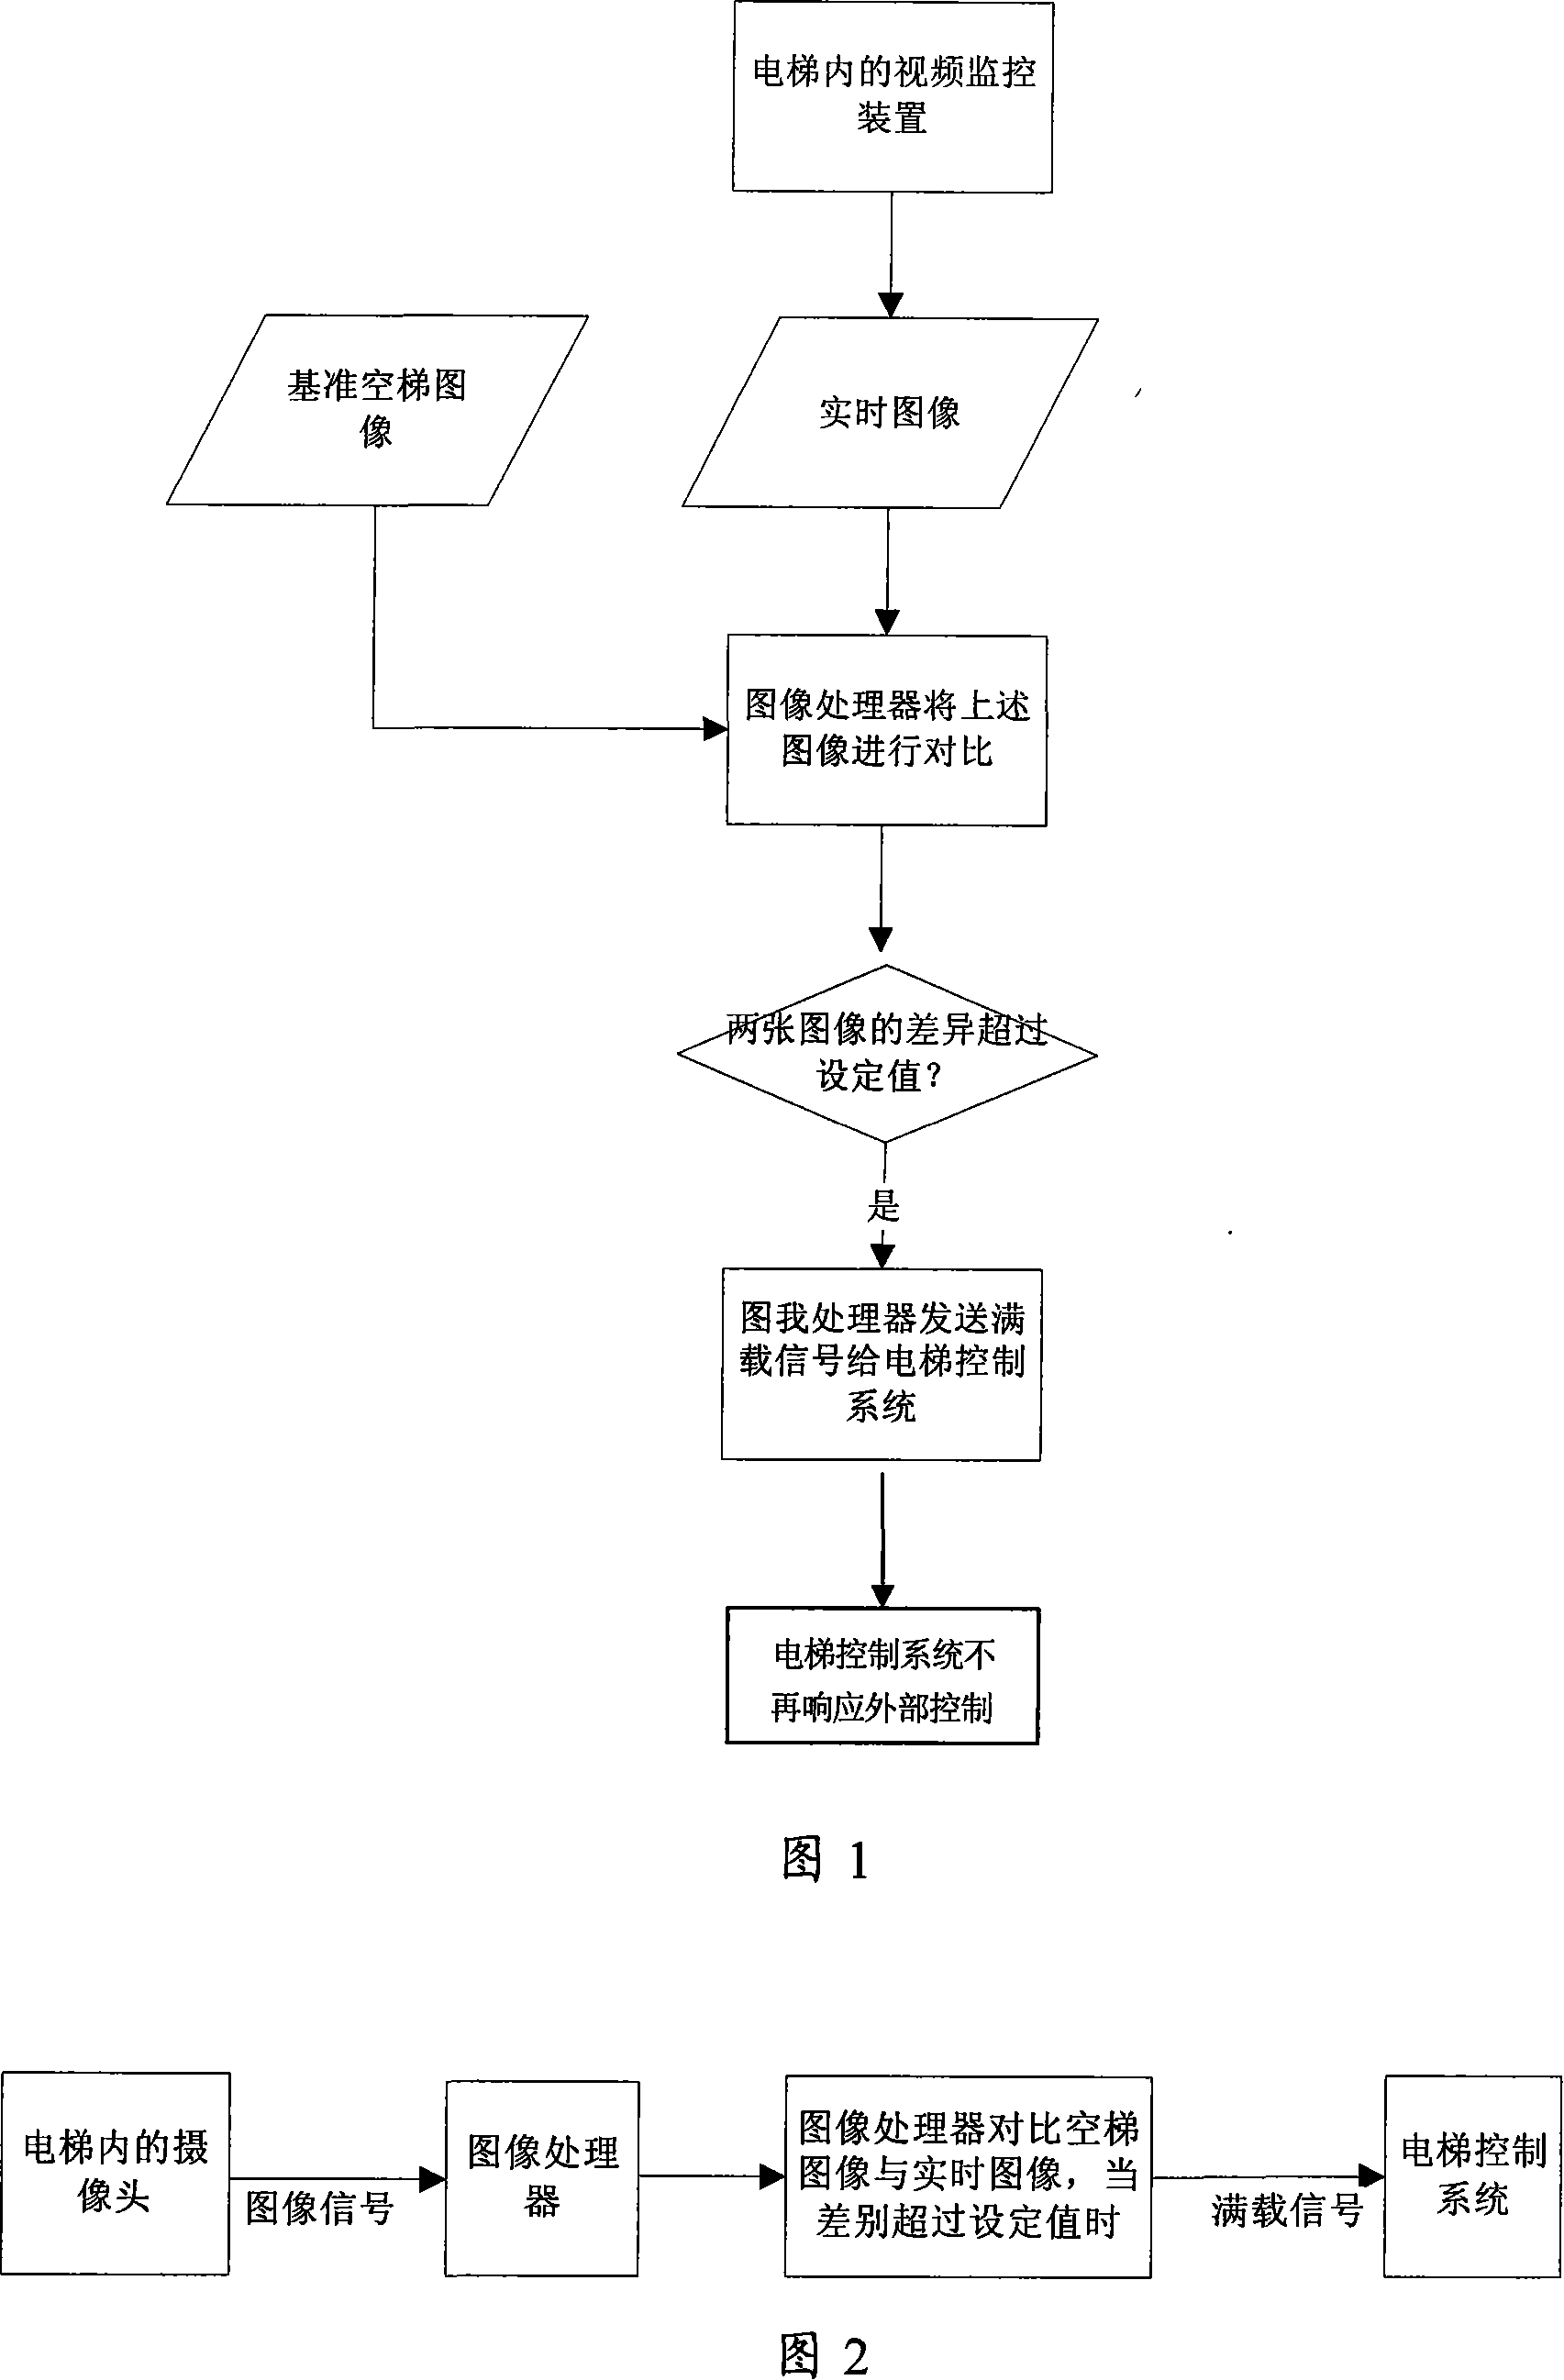 Function lift control method and system using video monitoring apparatus